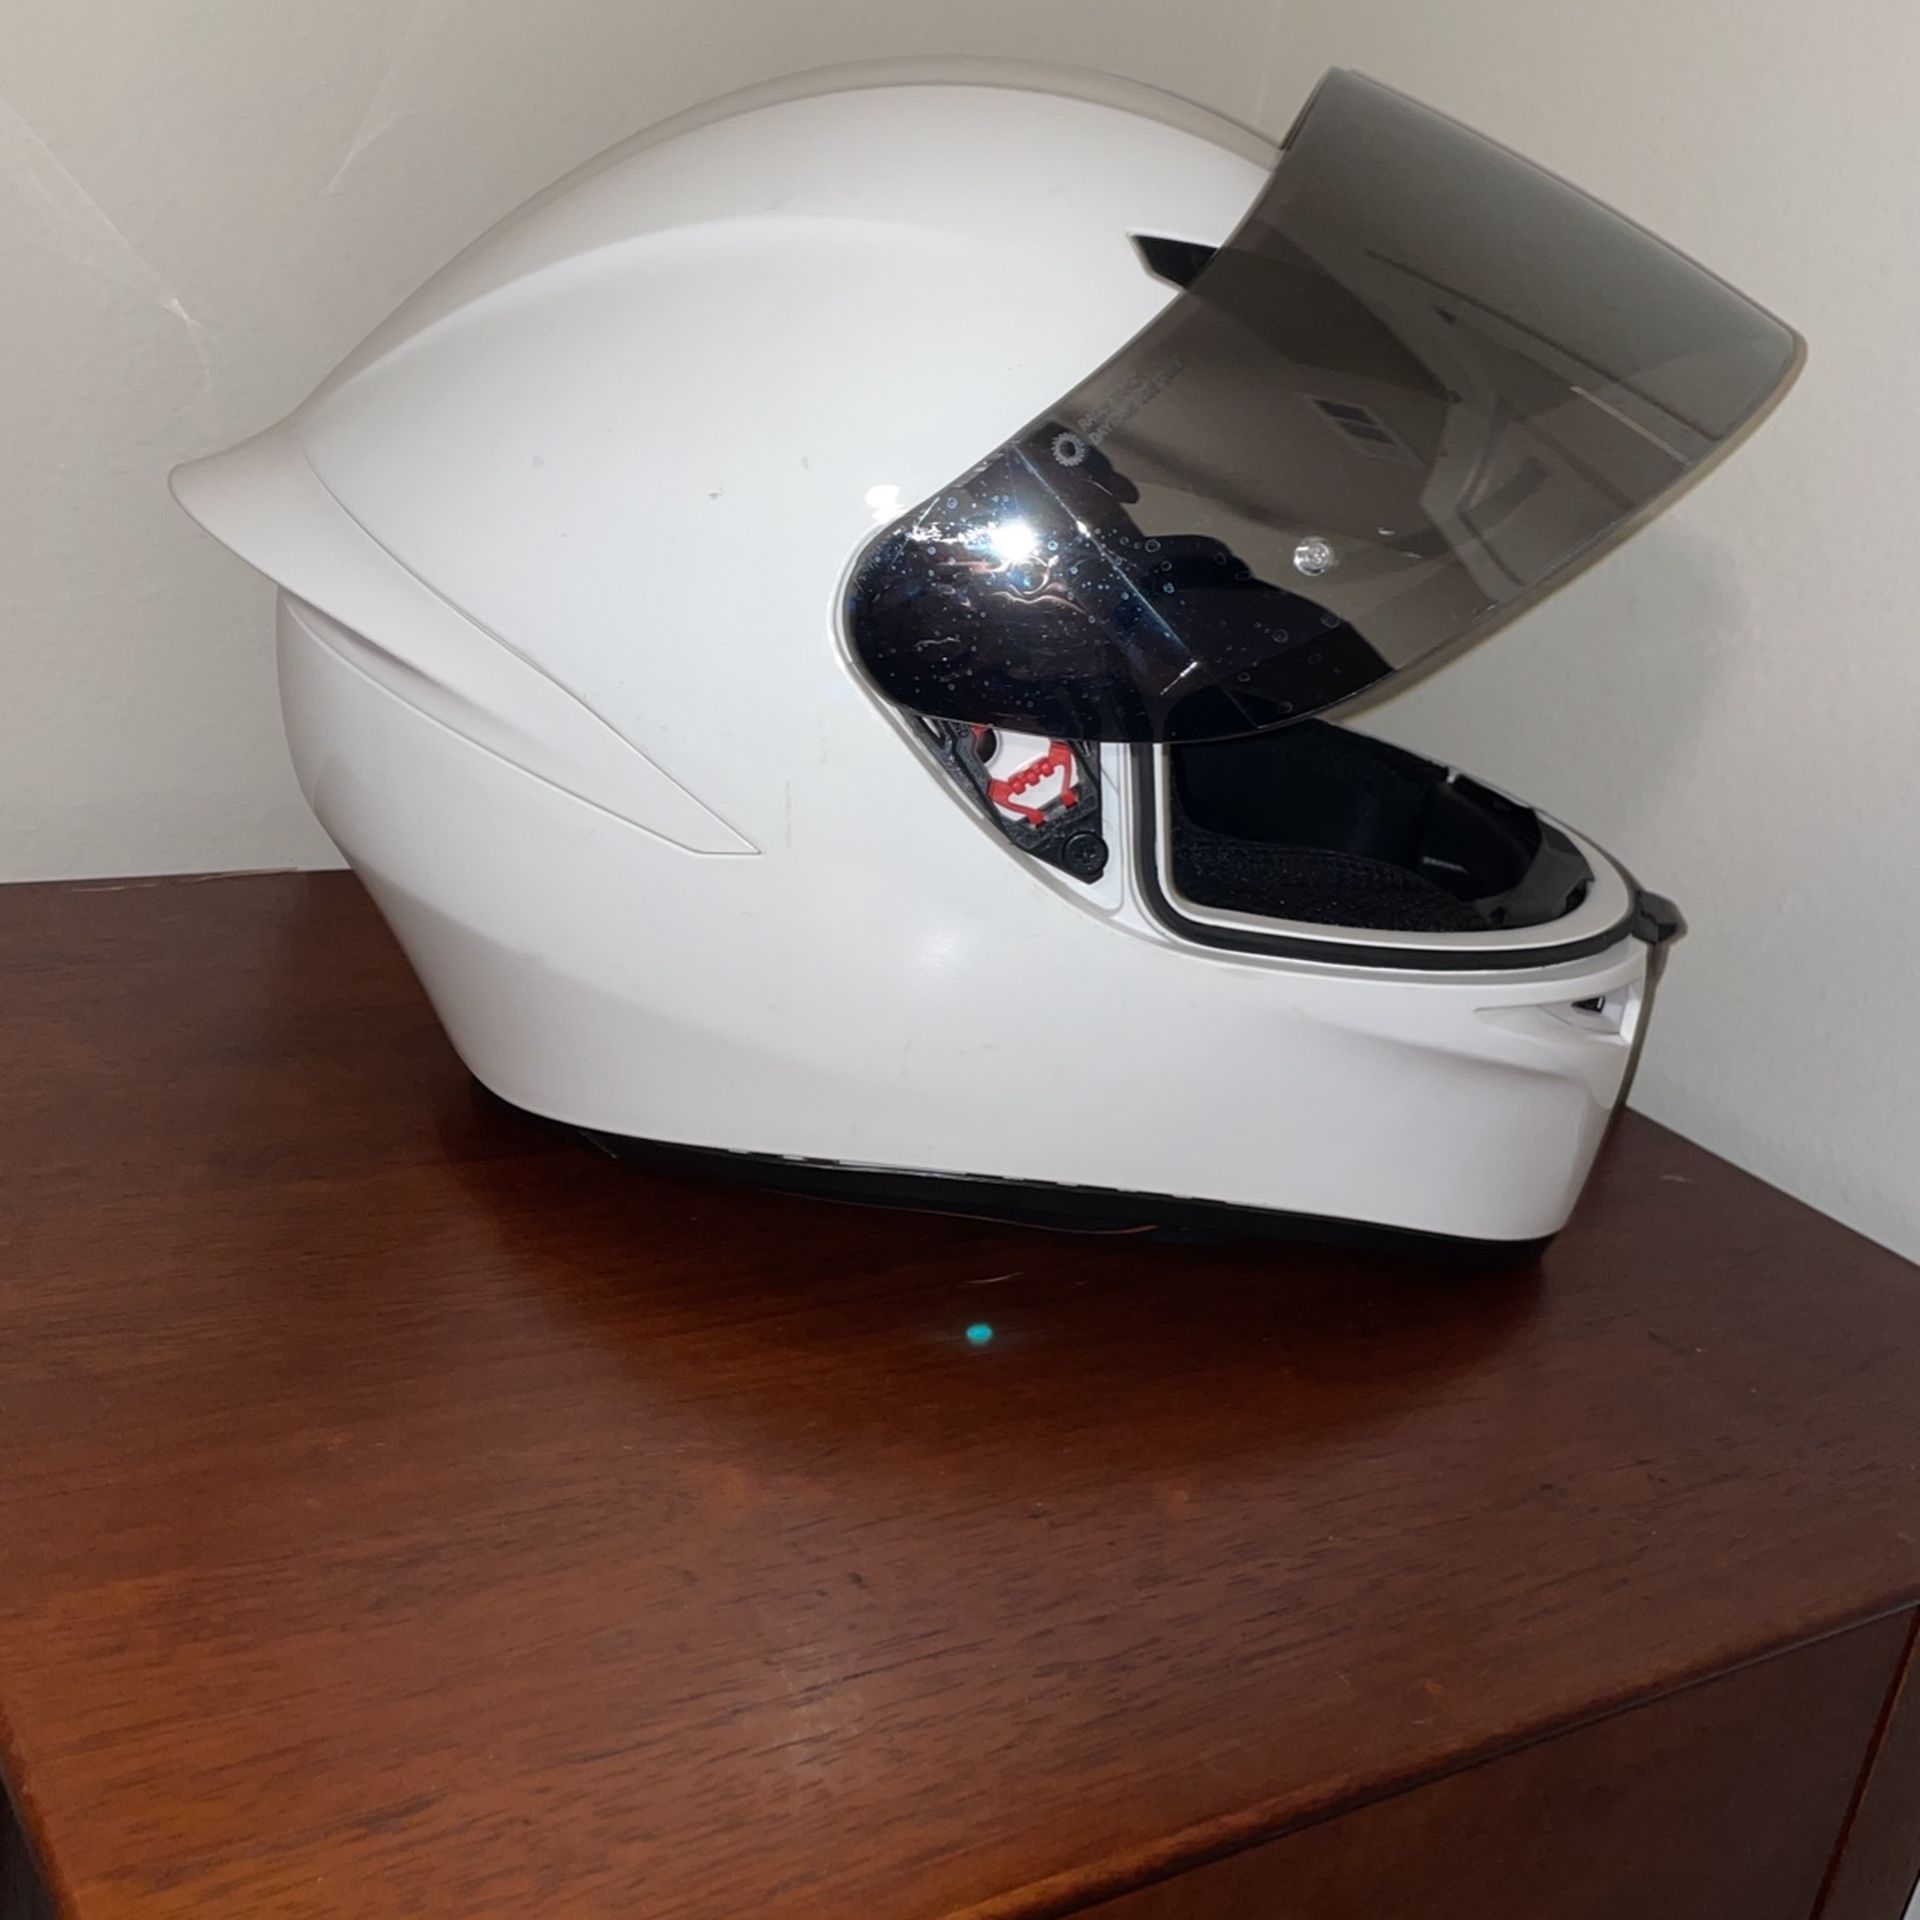 AGV motorcycle helmet for sale! Size ML